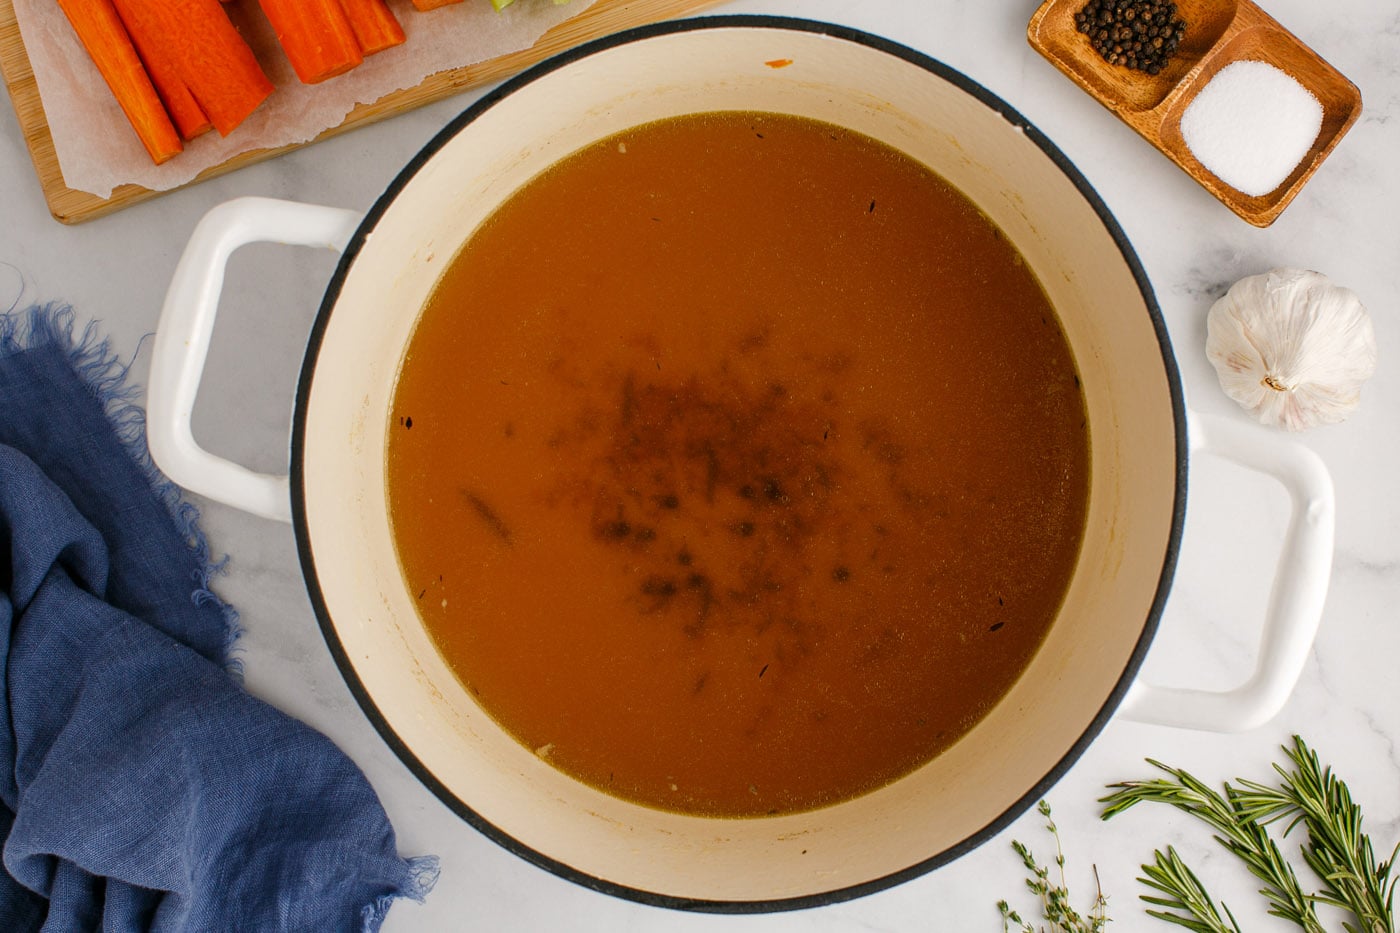 homemade chicken stock in a stockpot